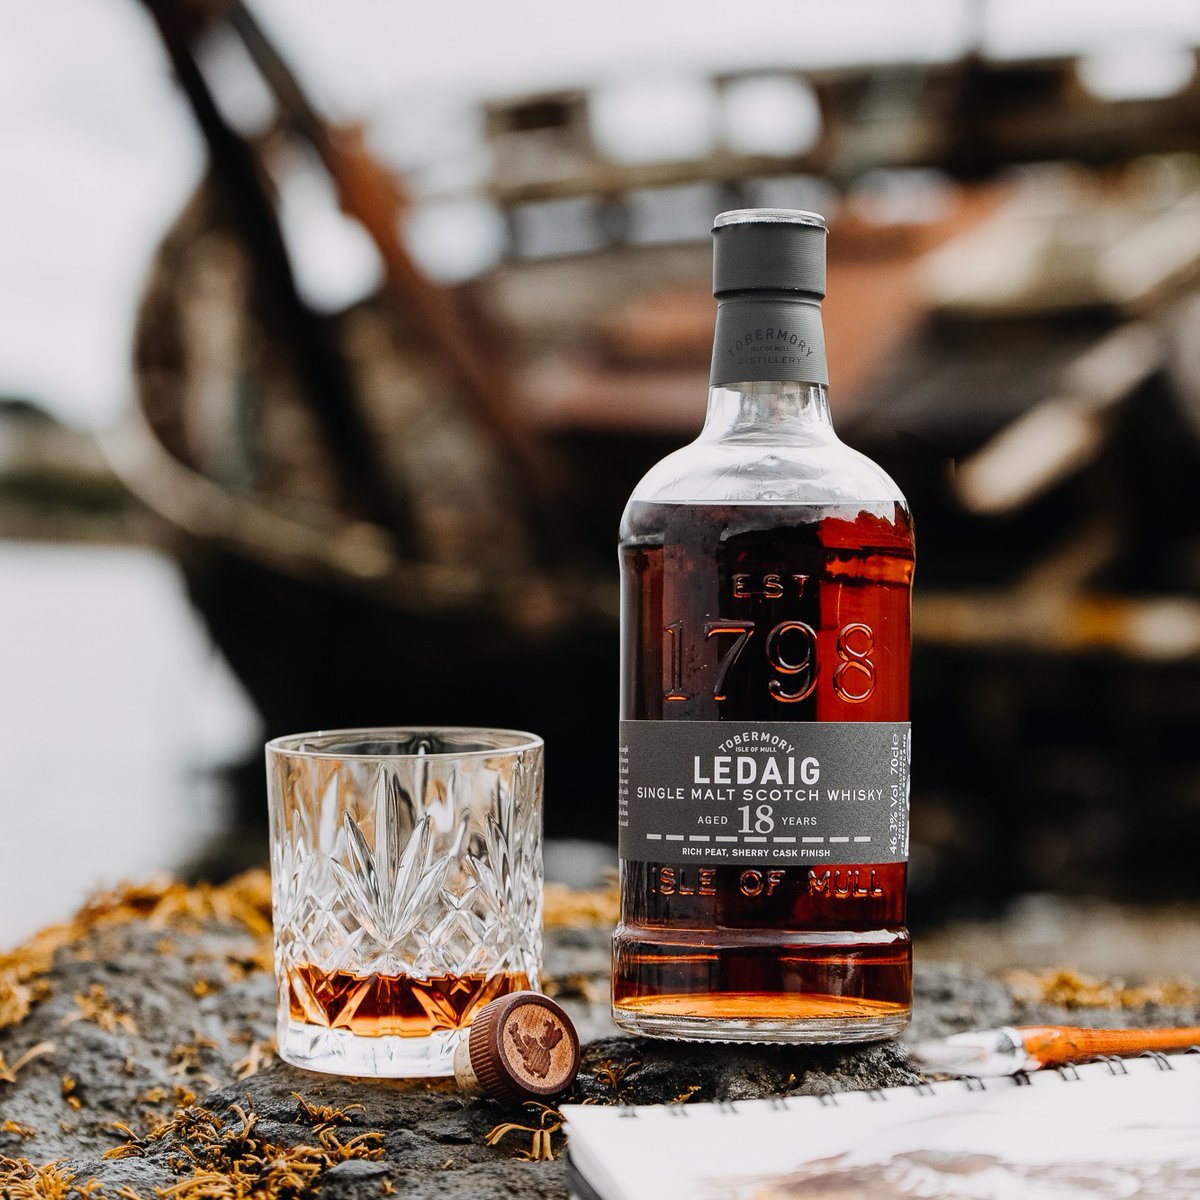 Ledaig 18 Year Old | bit.ly/3xAMPPn Awarded Whisky of the Year in 2023, this Ledaig 18 Year Old is a fruity, peaty whisky from Tobermory, finished in sherry casks, balancing sweet, floral aromas with rich smoke and sea salt on the palate.